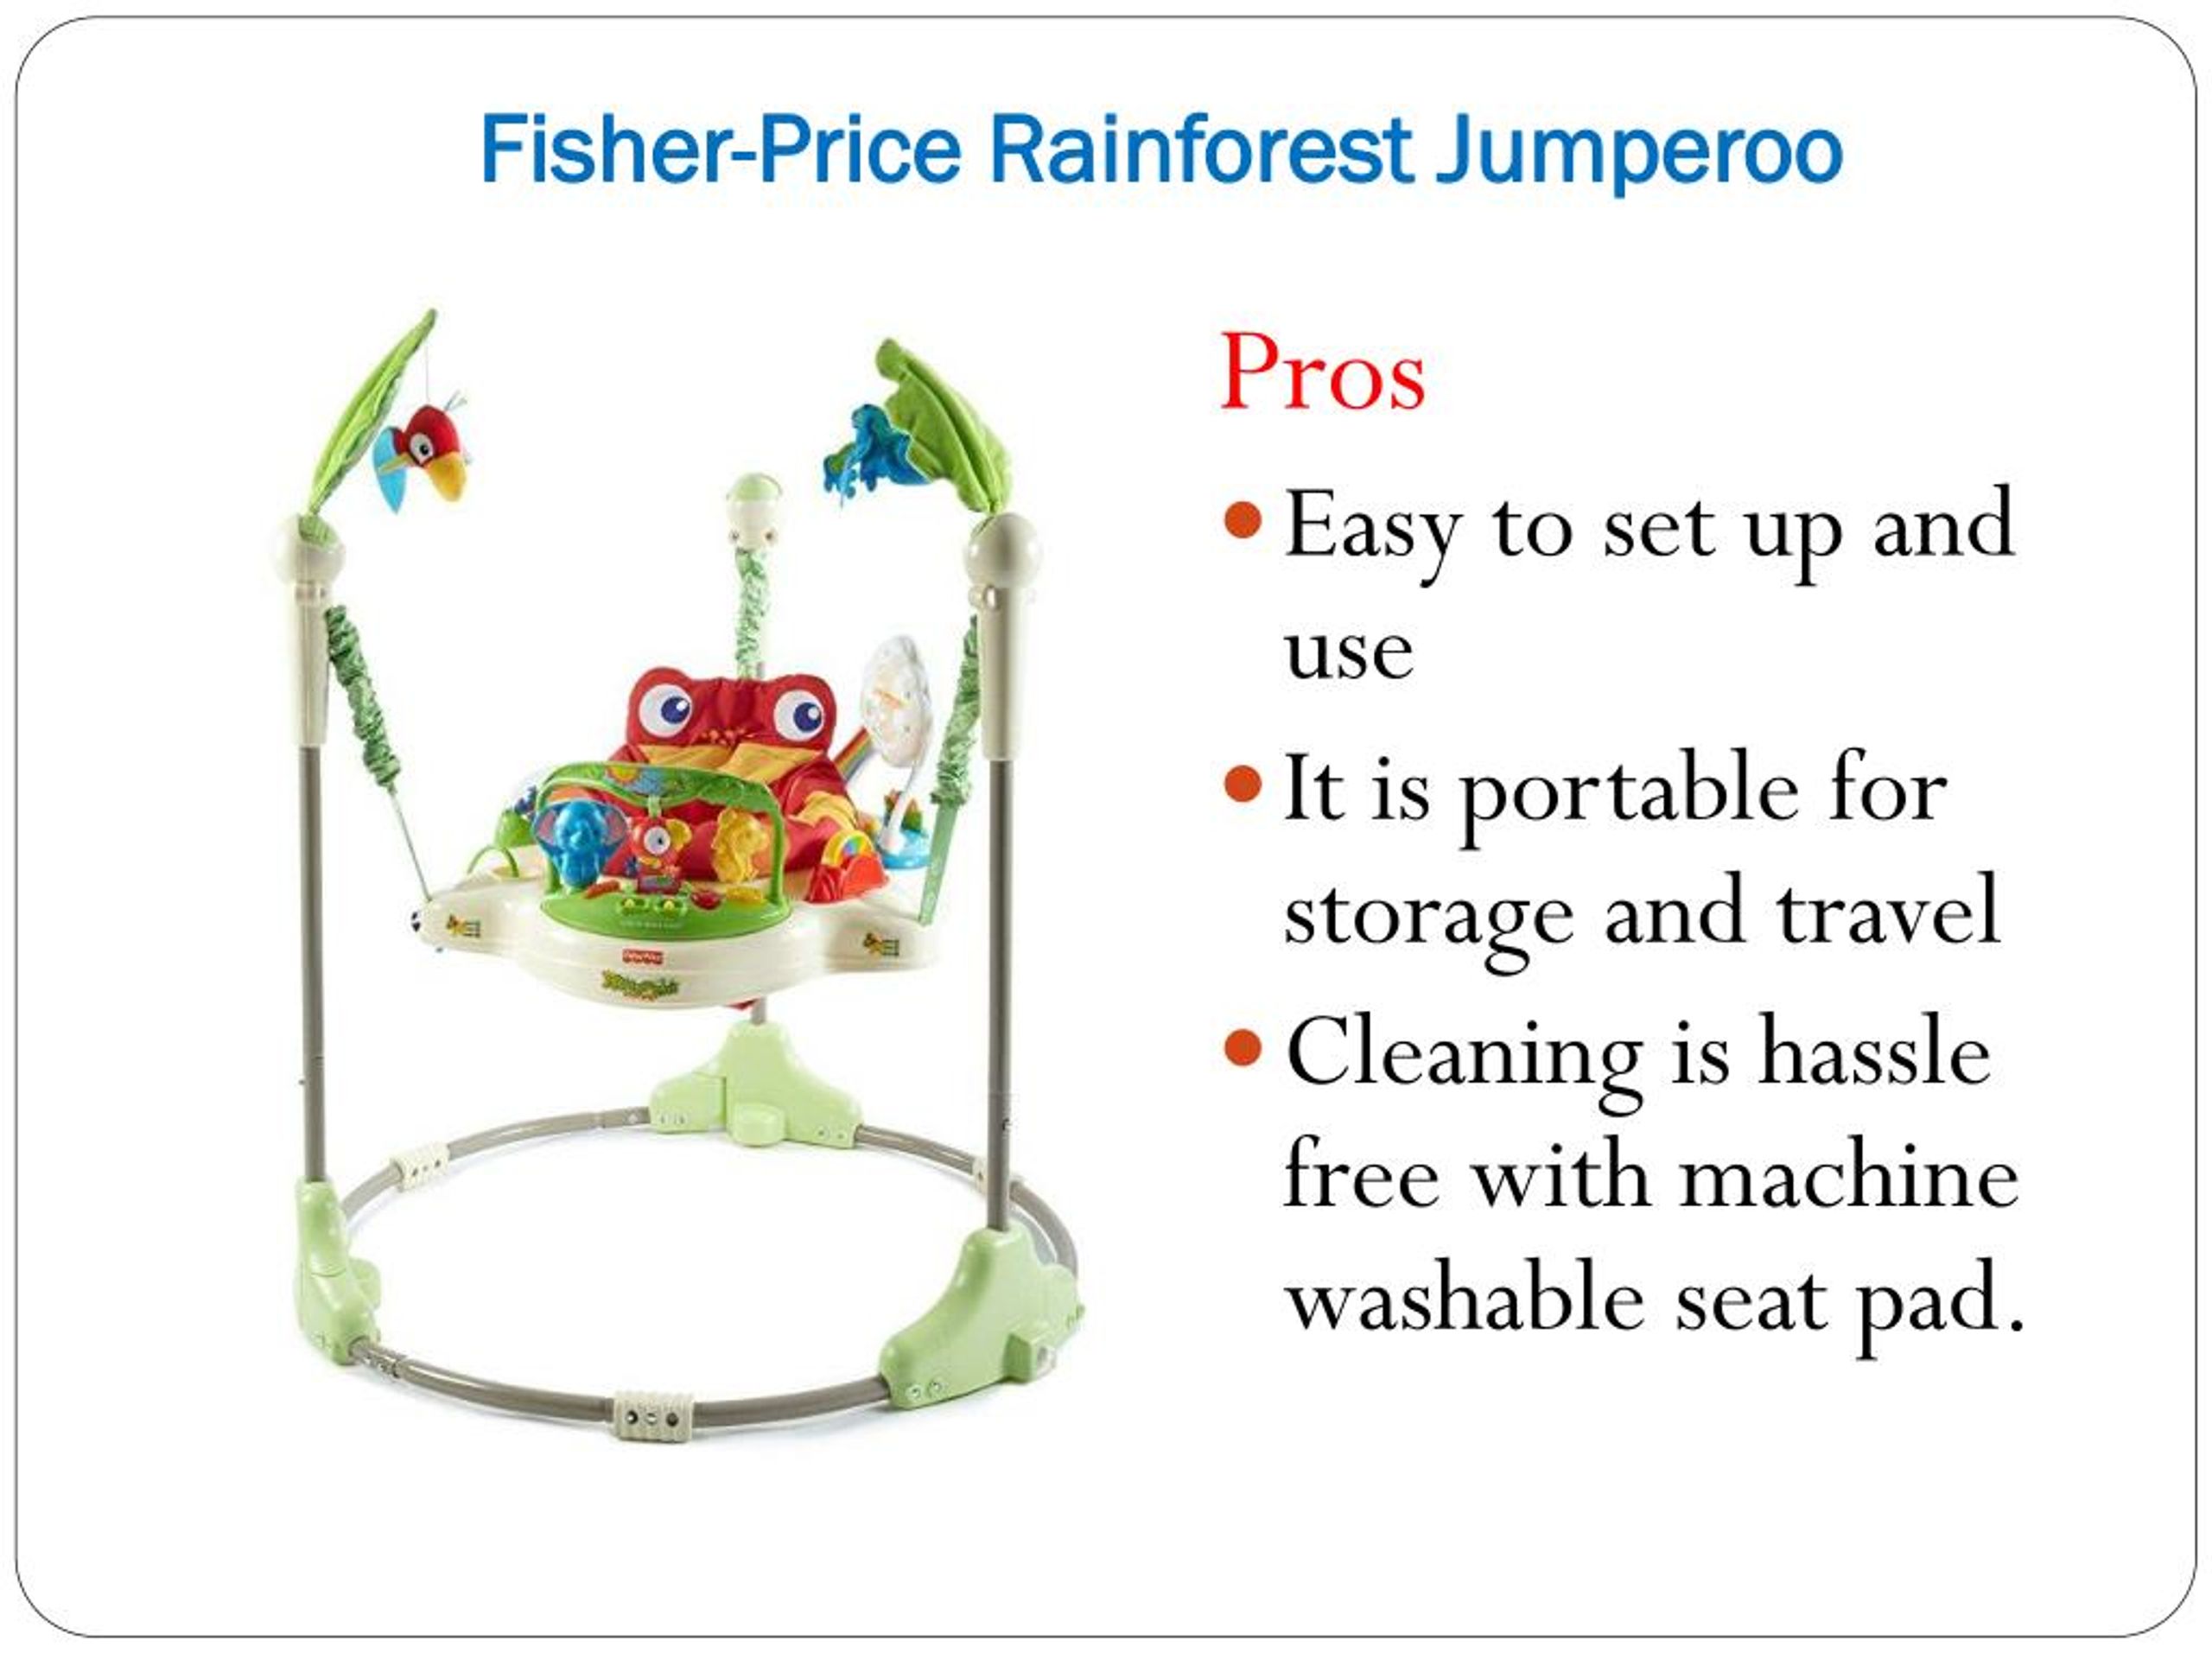 fisher price rainforest jumperoo cleaning instructions